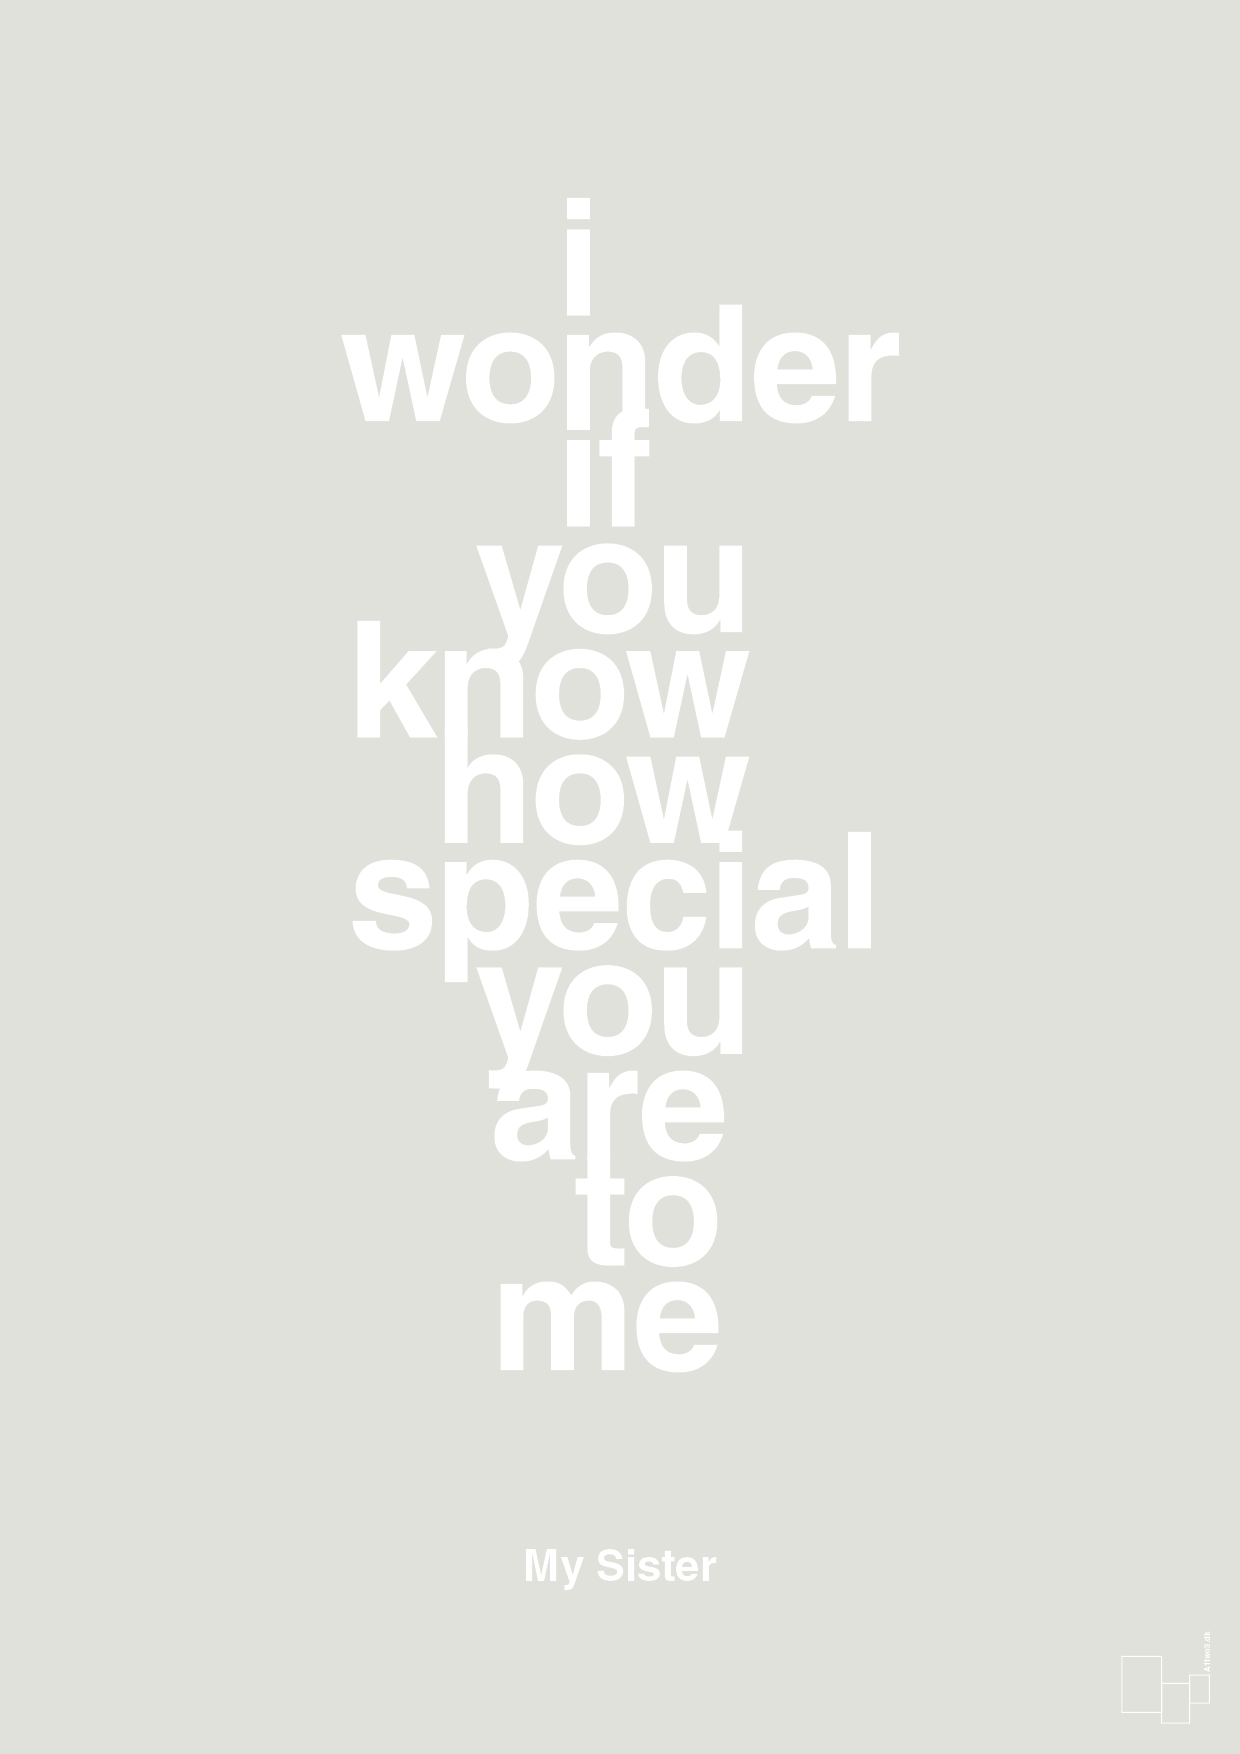 my sister - i wonder if you know how special you are to me - Plakat med Citater i Painters White